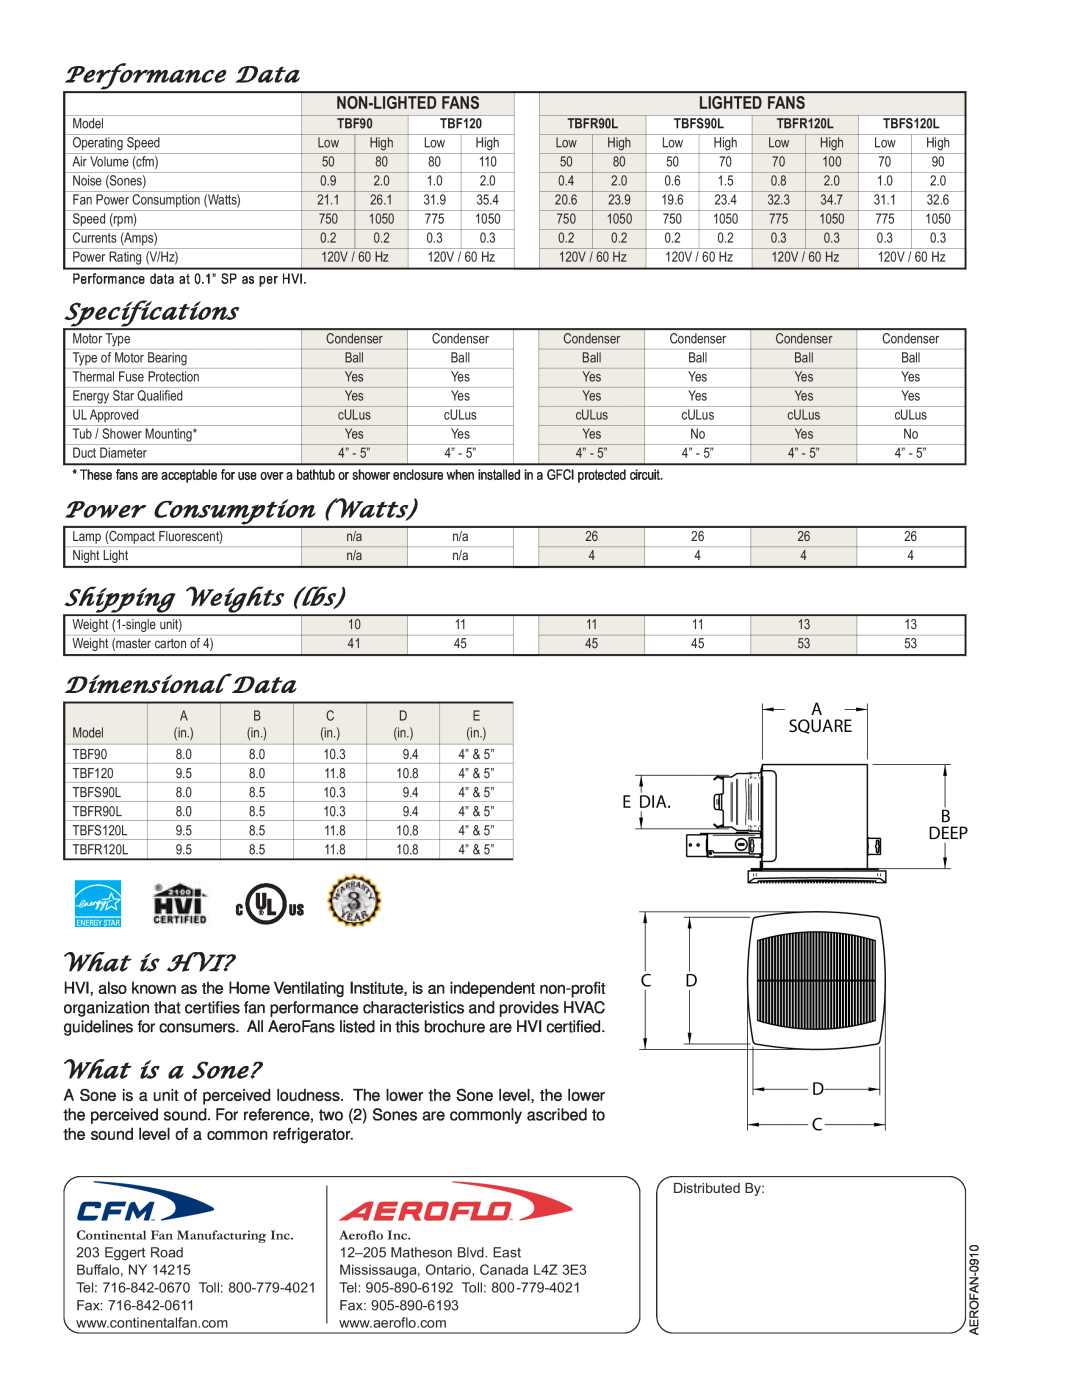 CFM AeroFan manual Performance Data, Specifications, Power Consumption Watts, Shipping Weights lbs, Dimensional Data, E Dia 